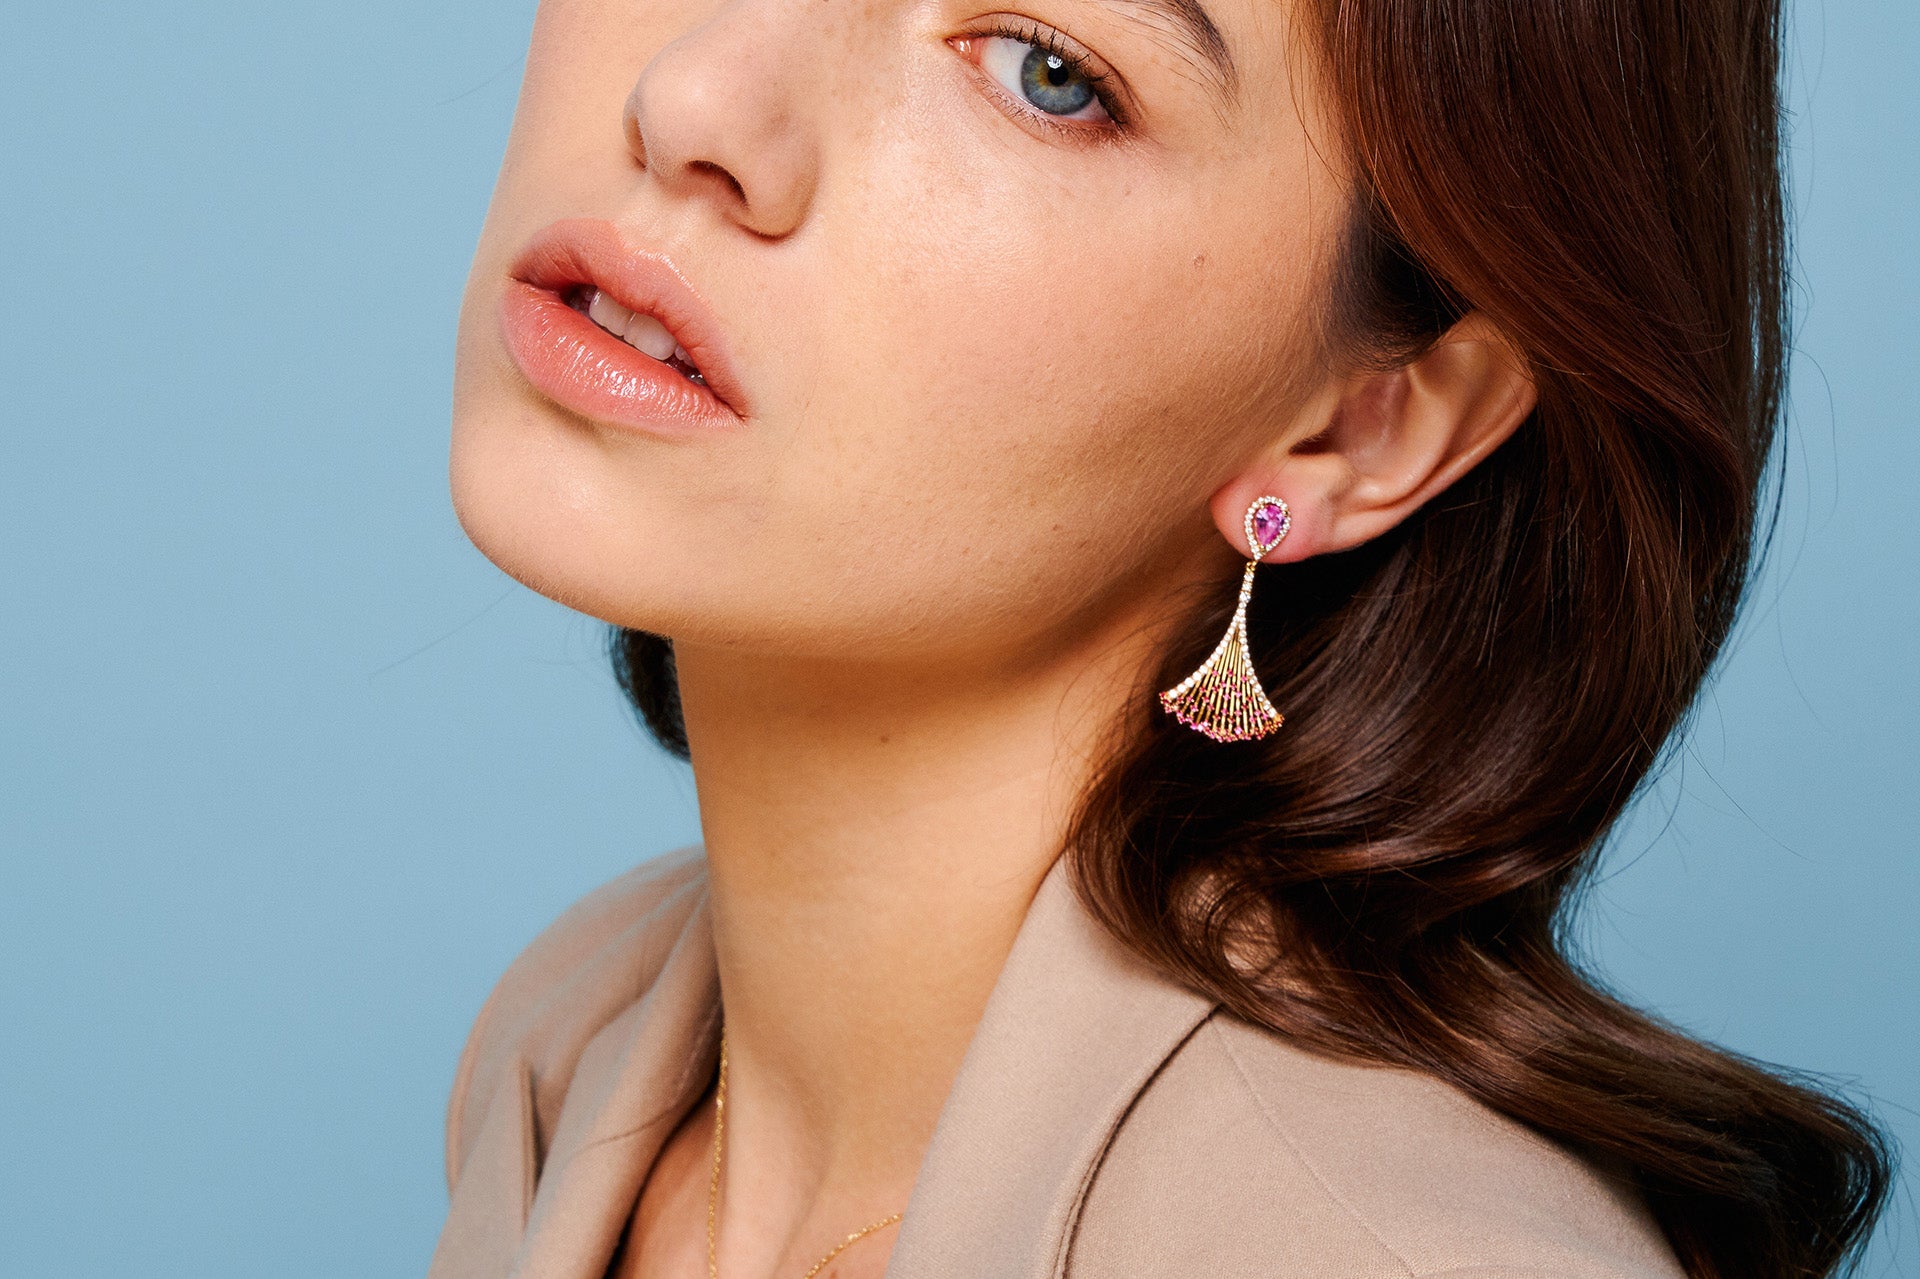 Yellow Gold Earrings with a pear shaped Pink Sapphire and small round Rubies, Large - Model shot 